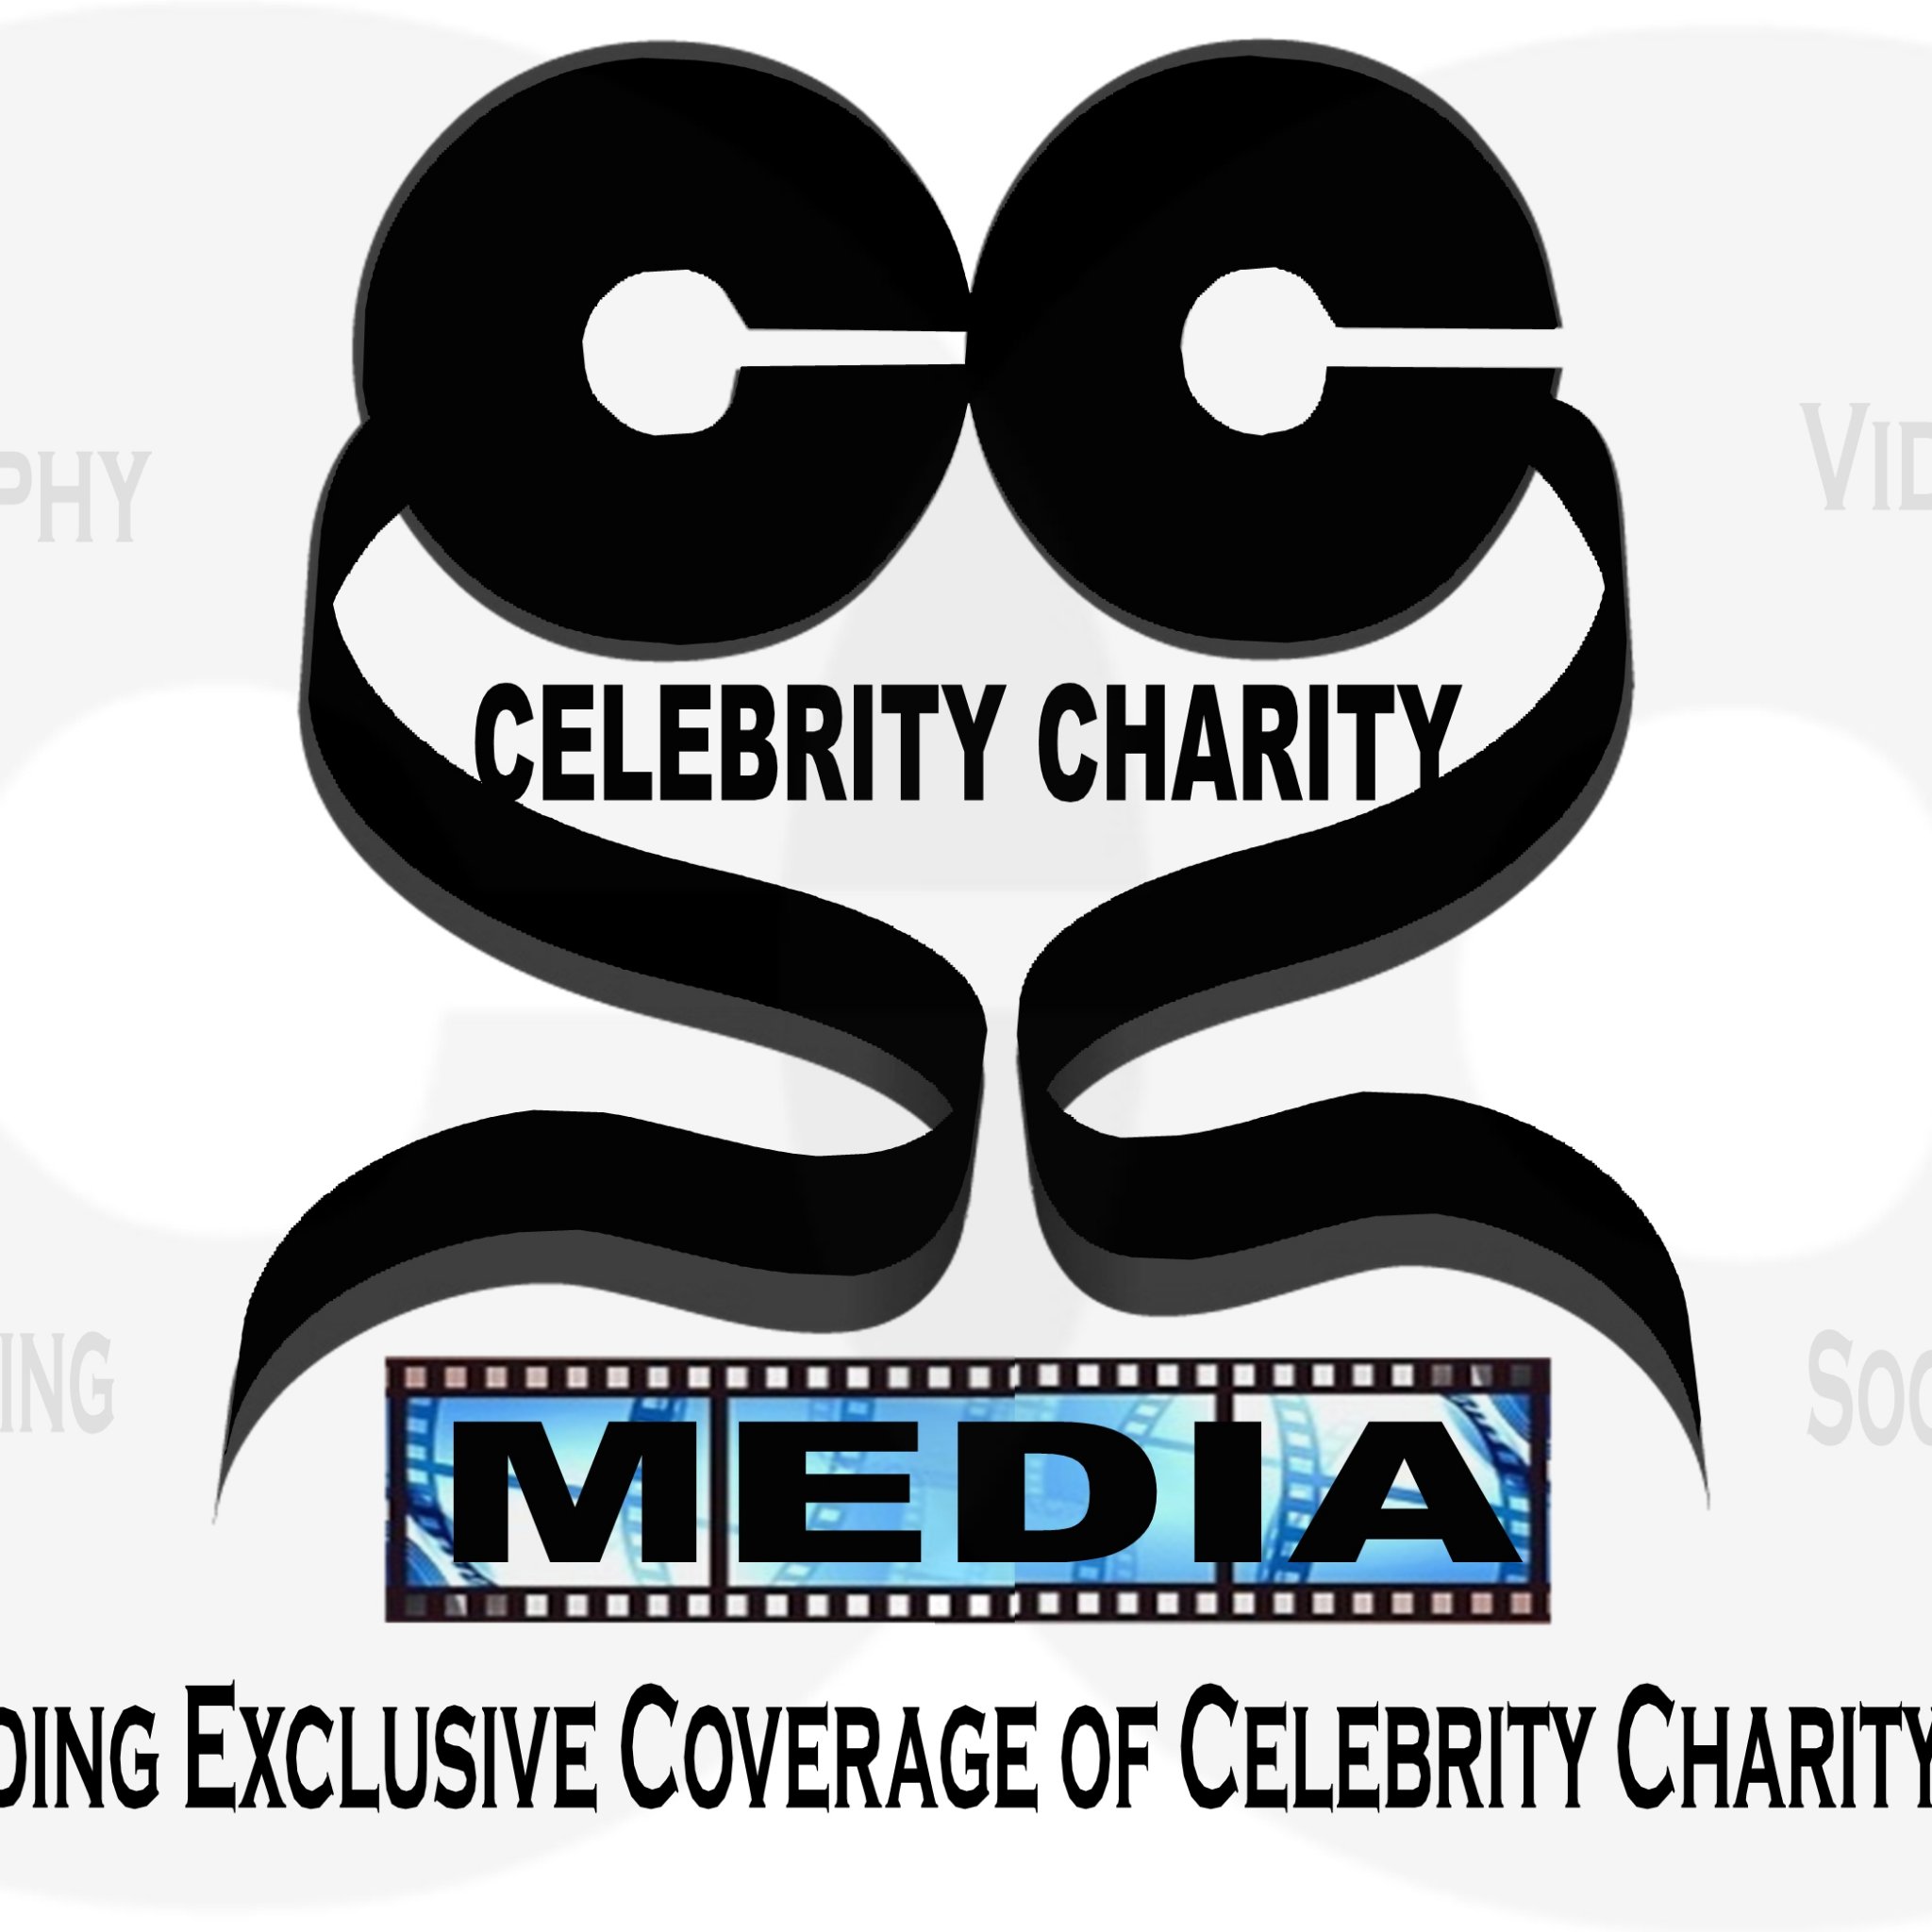 Celebrity Charity Media™ produces Celebrity Charity Magazine™and Celebrity Charity TV™! Our team has got YOUR charity events covered!